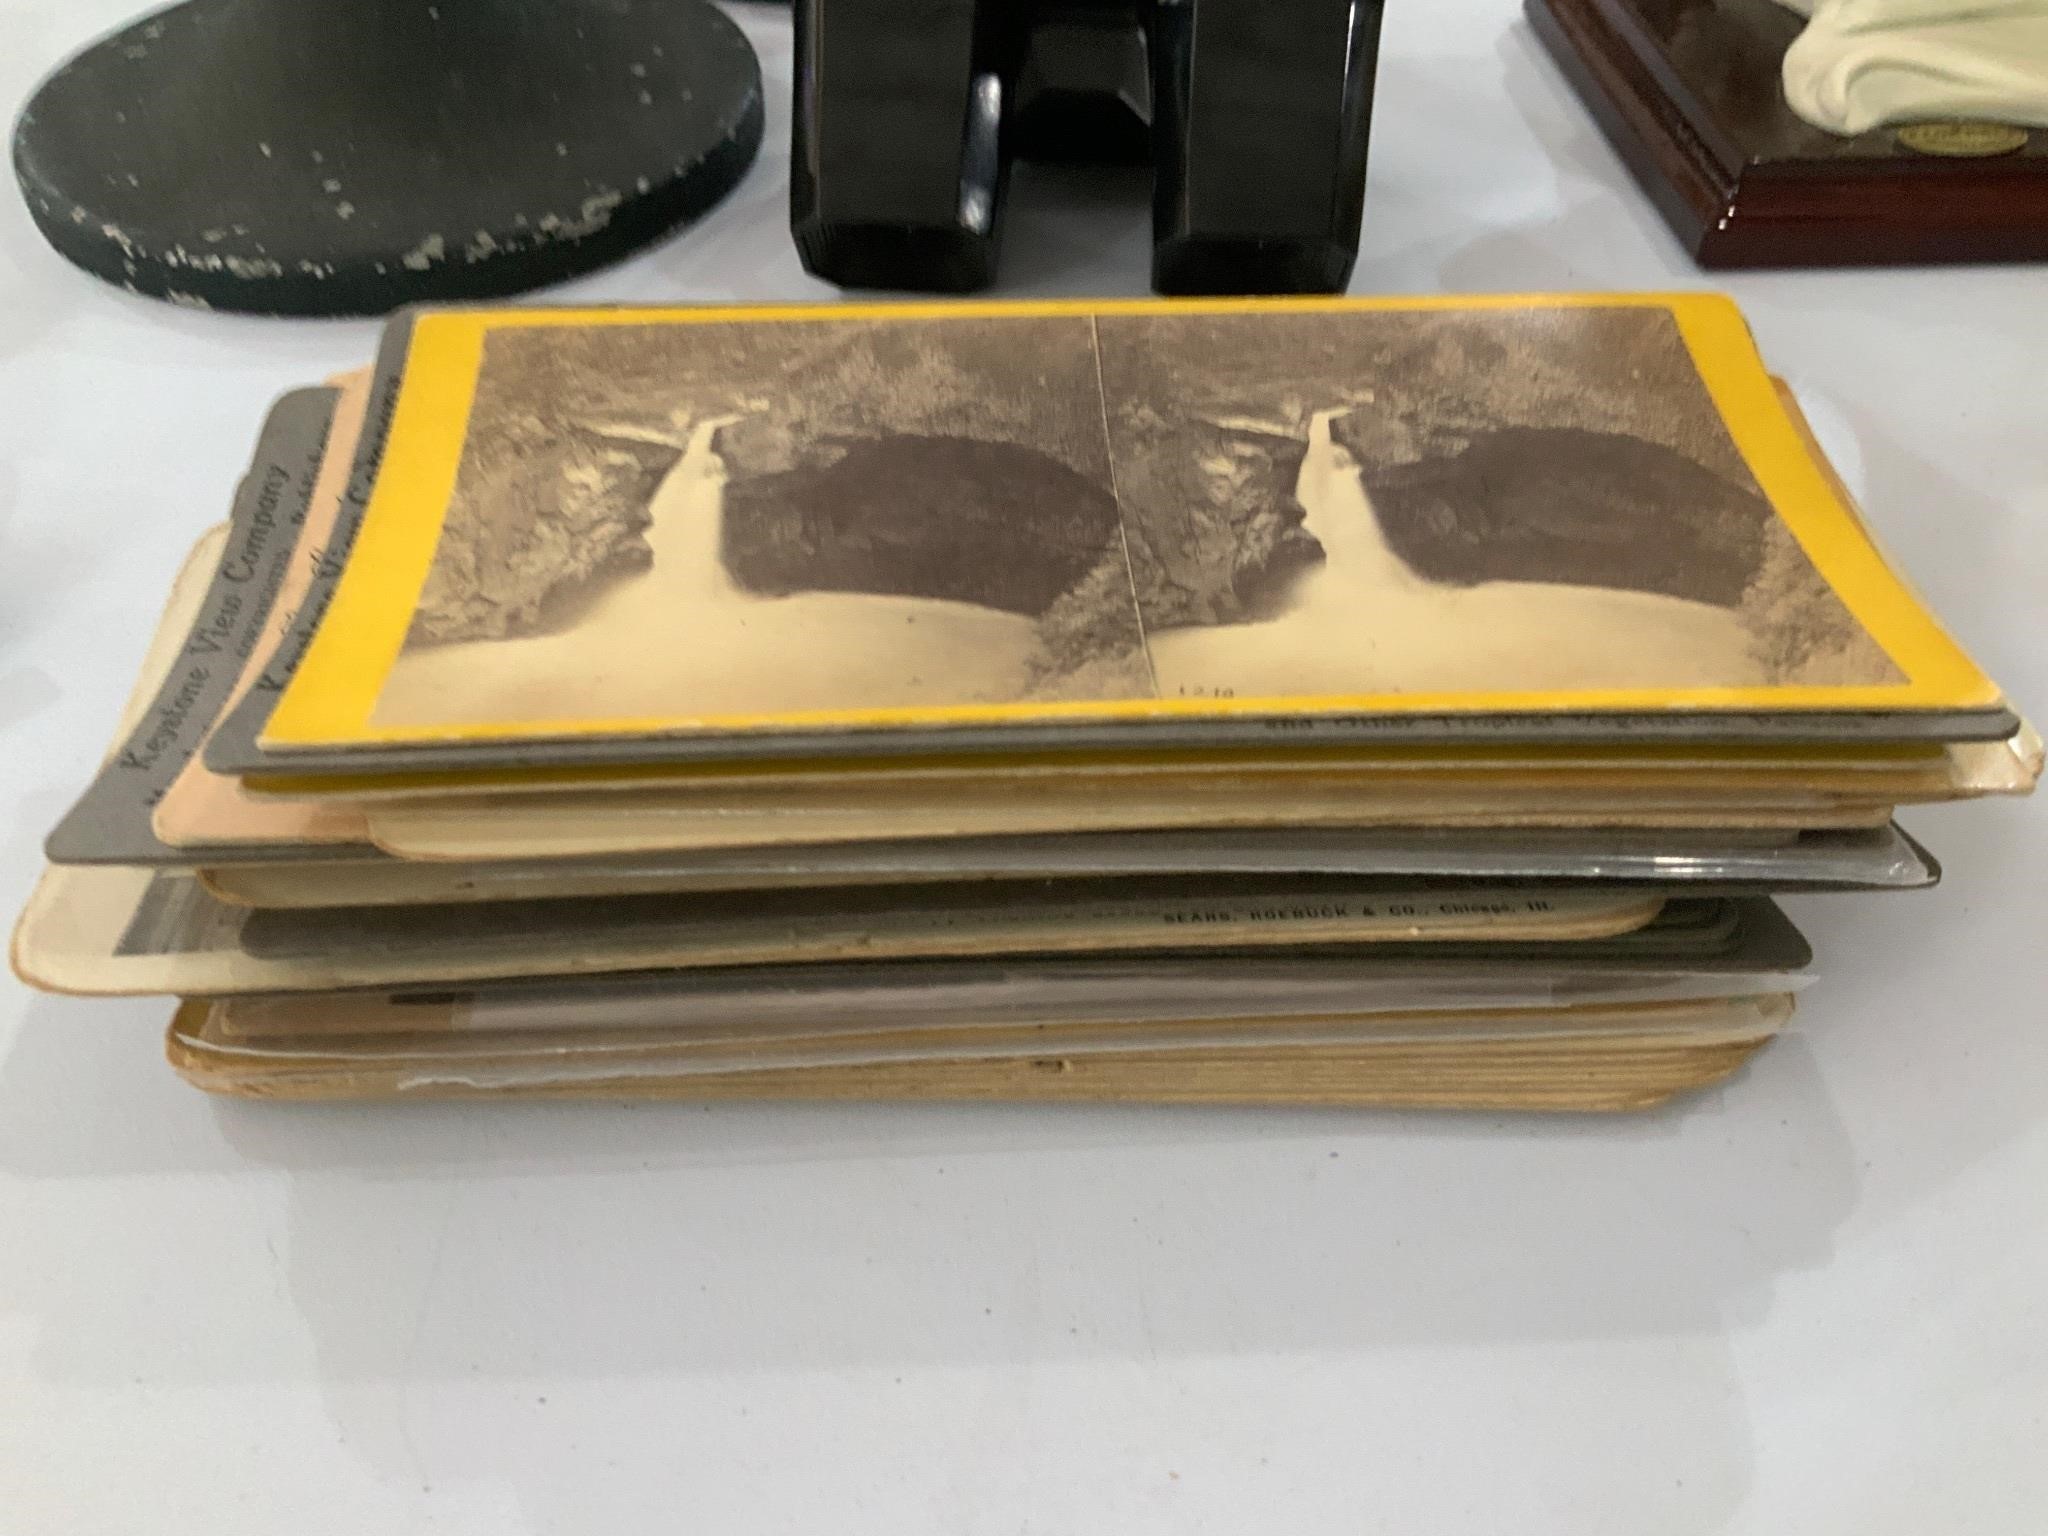 stack of stereoscope slides for viewers